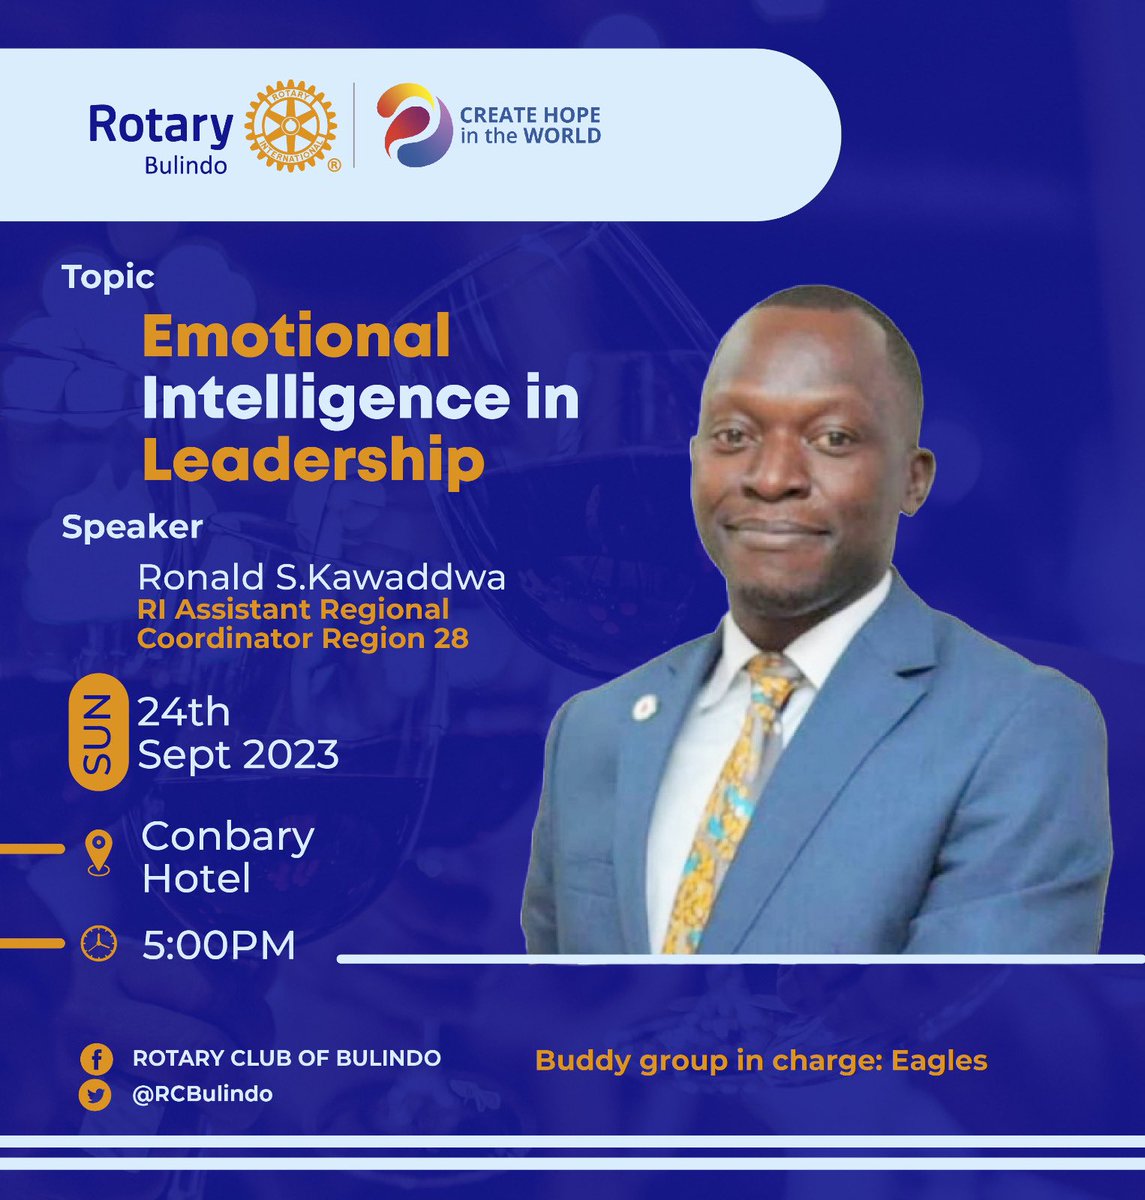 Kindly join @RCBulindo for fellowship today at Conbary Resort, Bulindo at 5pm. It will be worthwhile as we shall gain insight on #emotionalintelligence in leadership. #Rotaryfellowship
To join online follow link 👇🏼. 

us02web.zoom.us/j/86980141802?…

@rotaryd9213 @BulindoRotaract